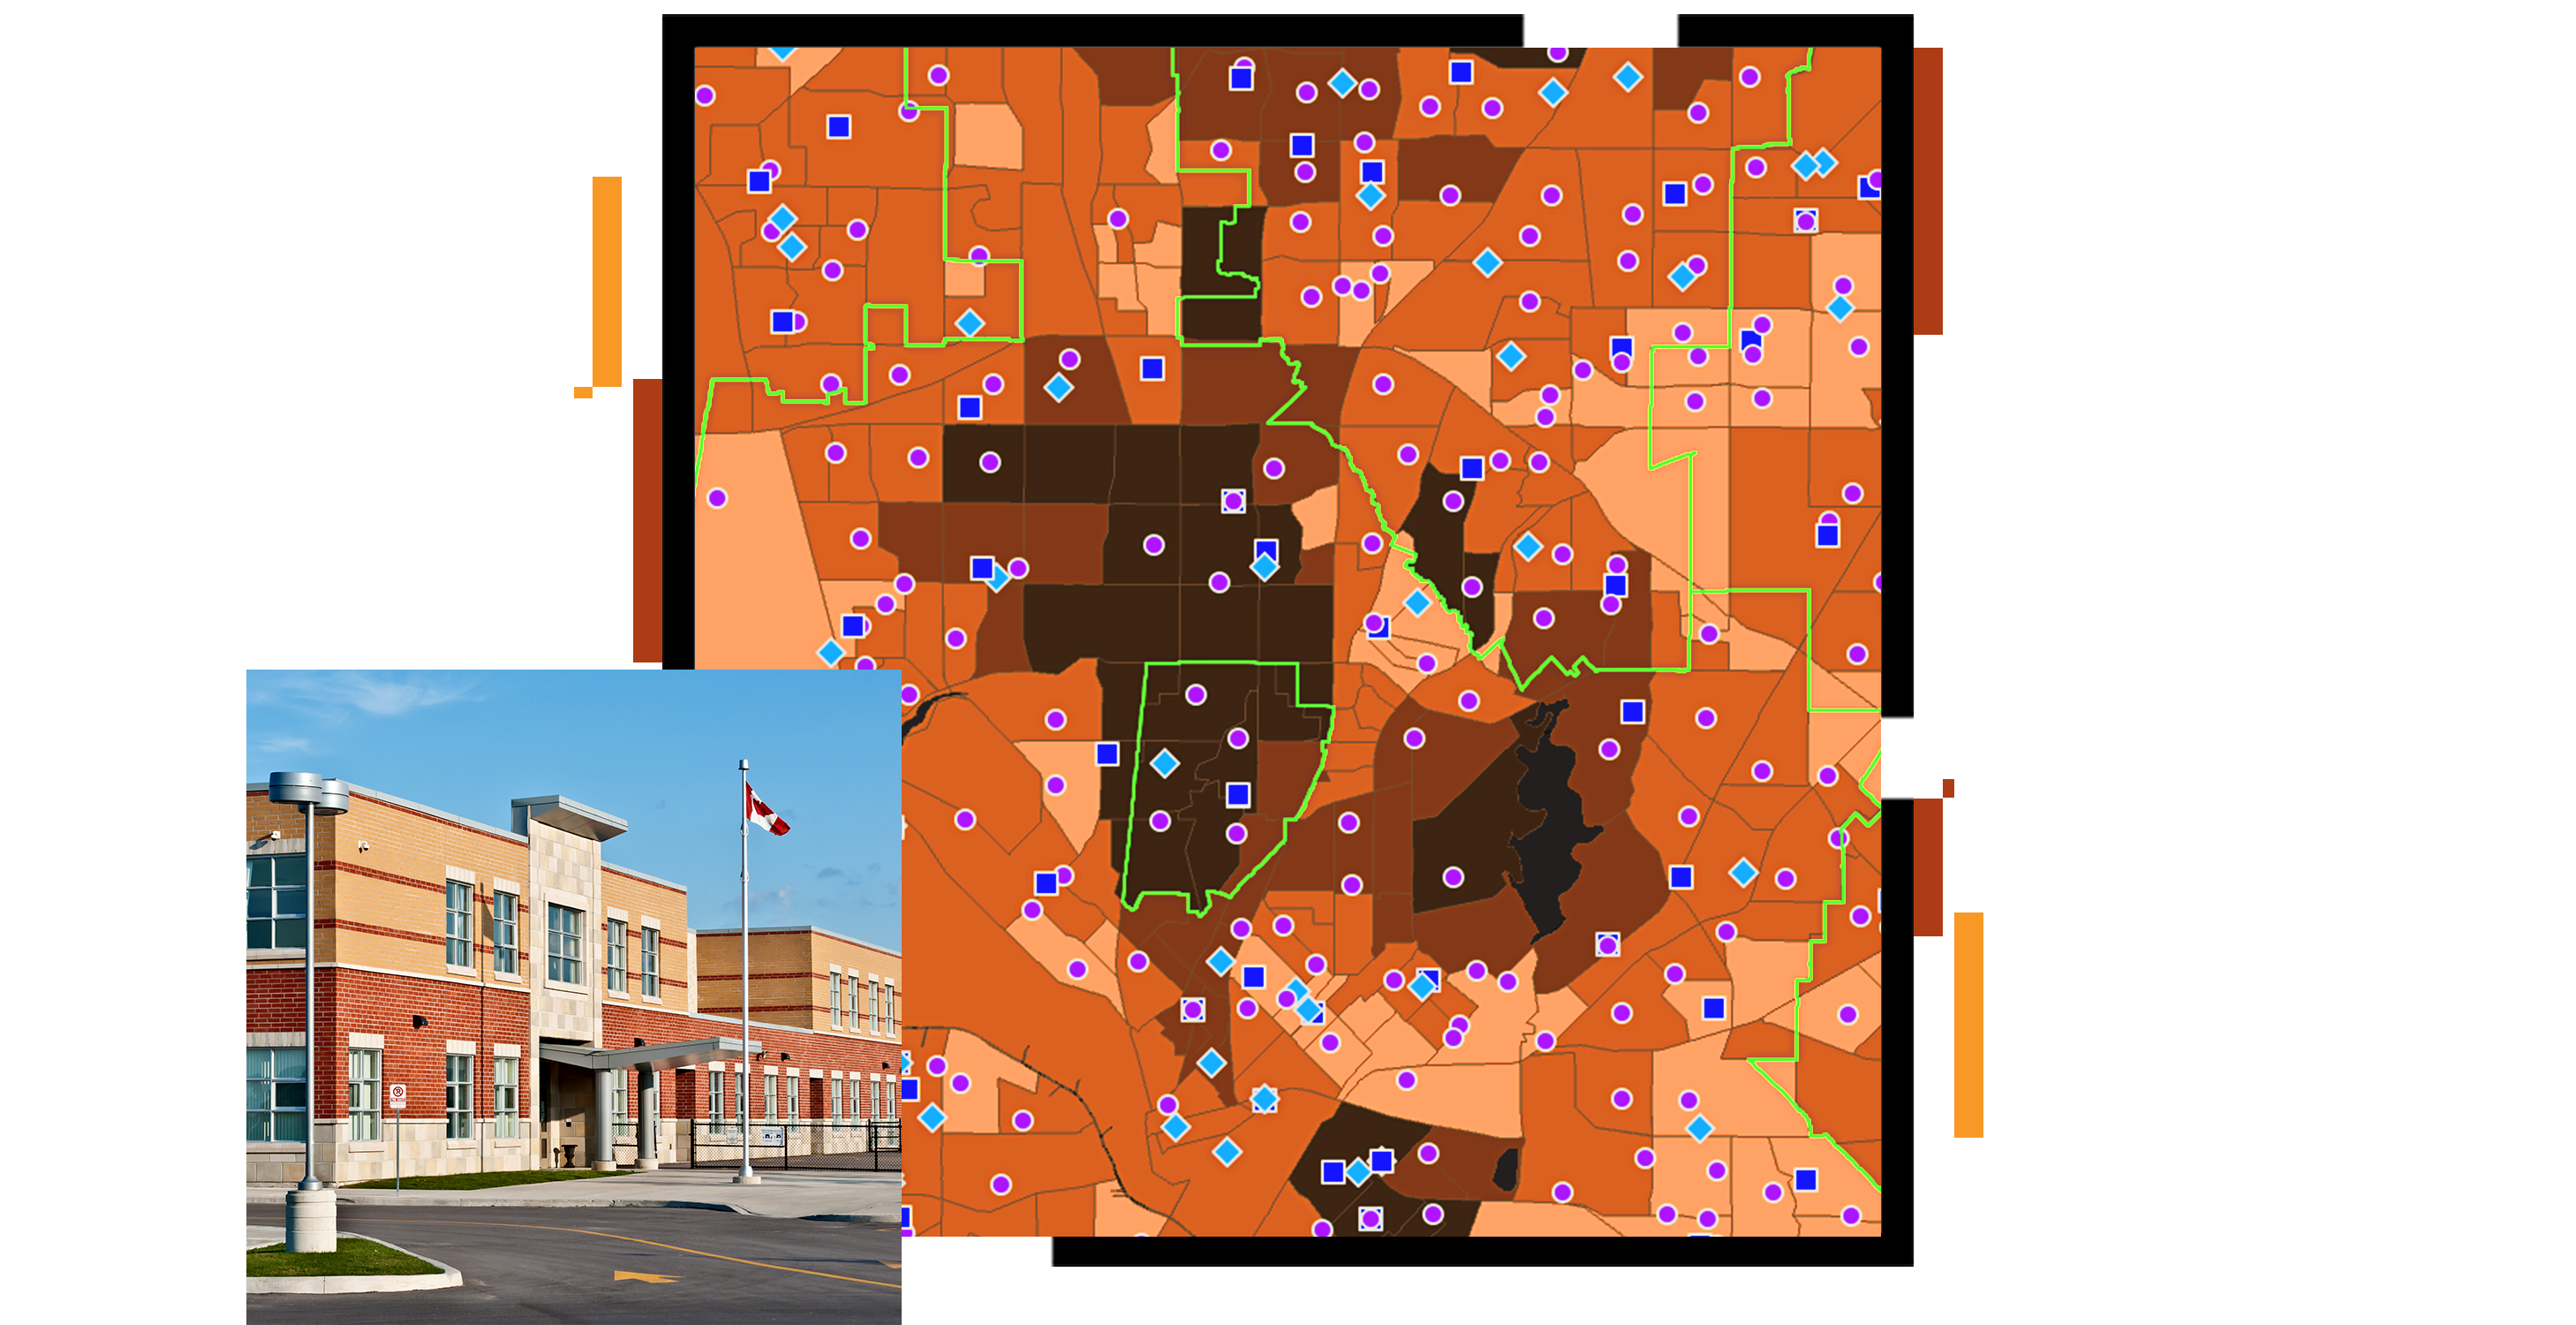 A district map in orange and brown scattered with purple and blue map points, and a small photo of a modern high school in orange and beige under a clear blue sky